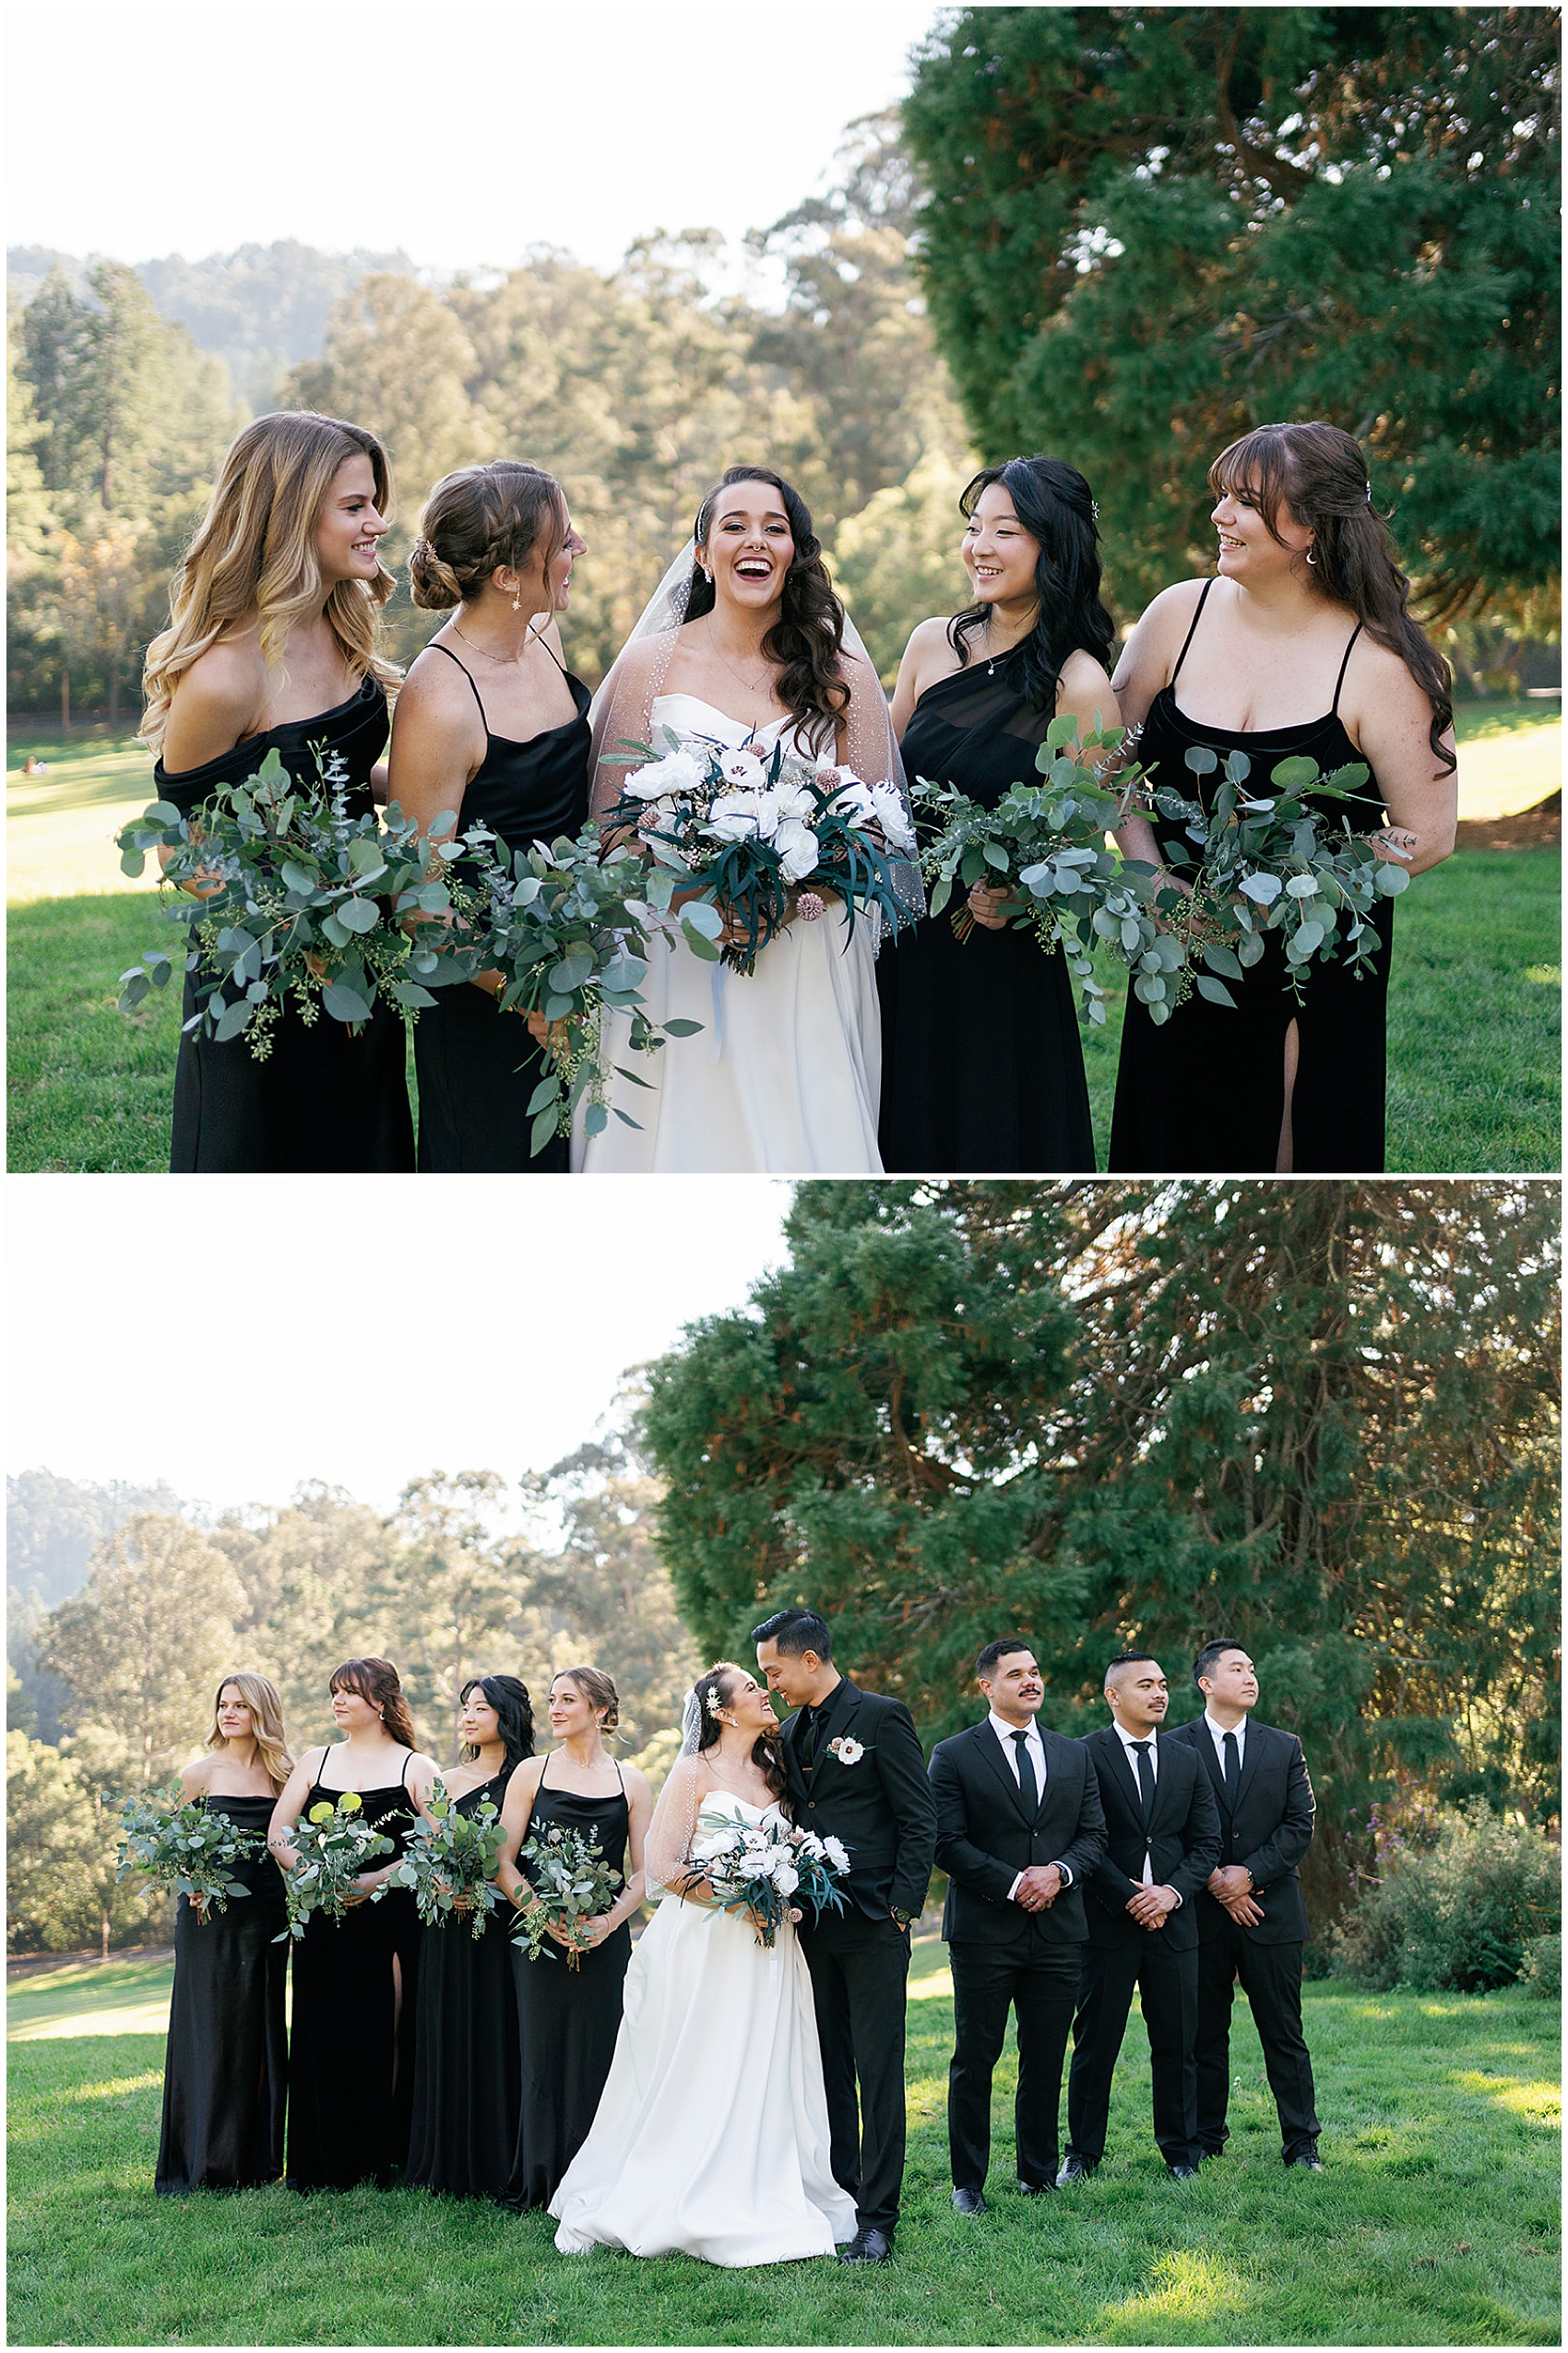 A bride stands in a field with her bridesmaids on top of her kissing her groom with the entire wedding party looking away